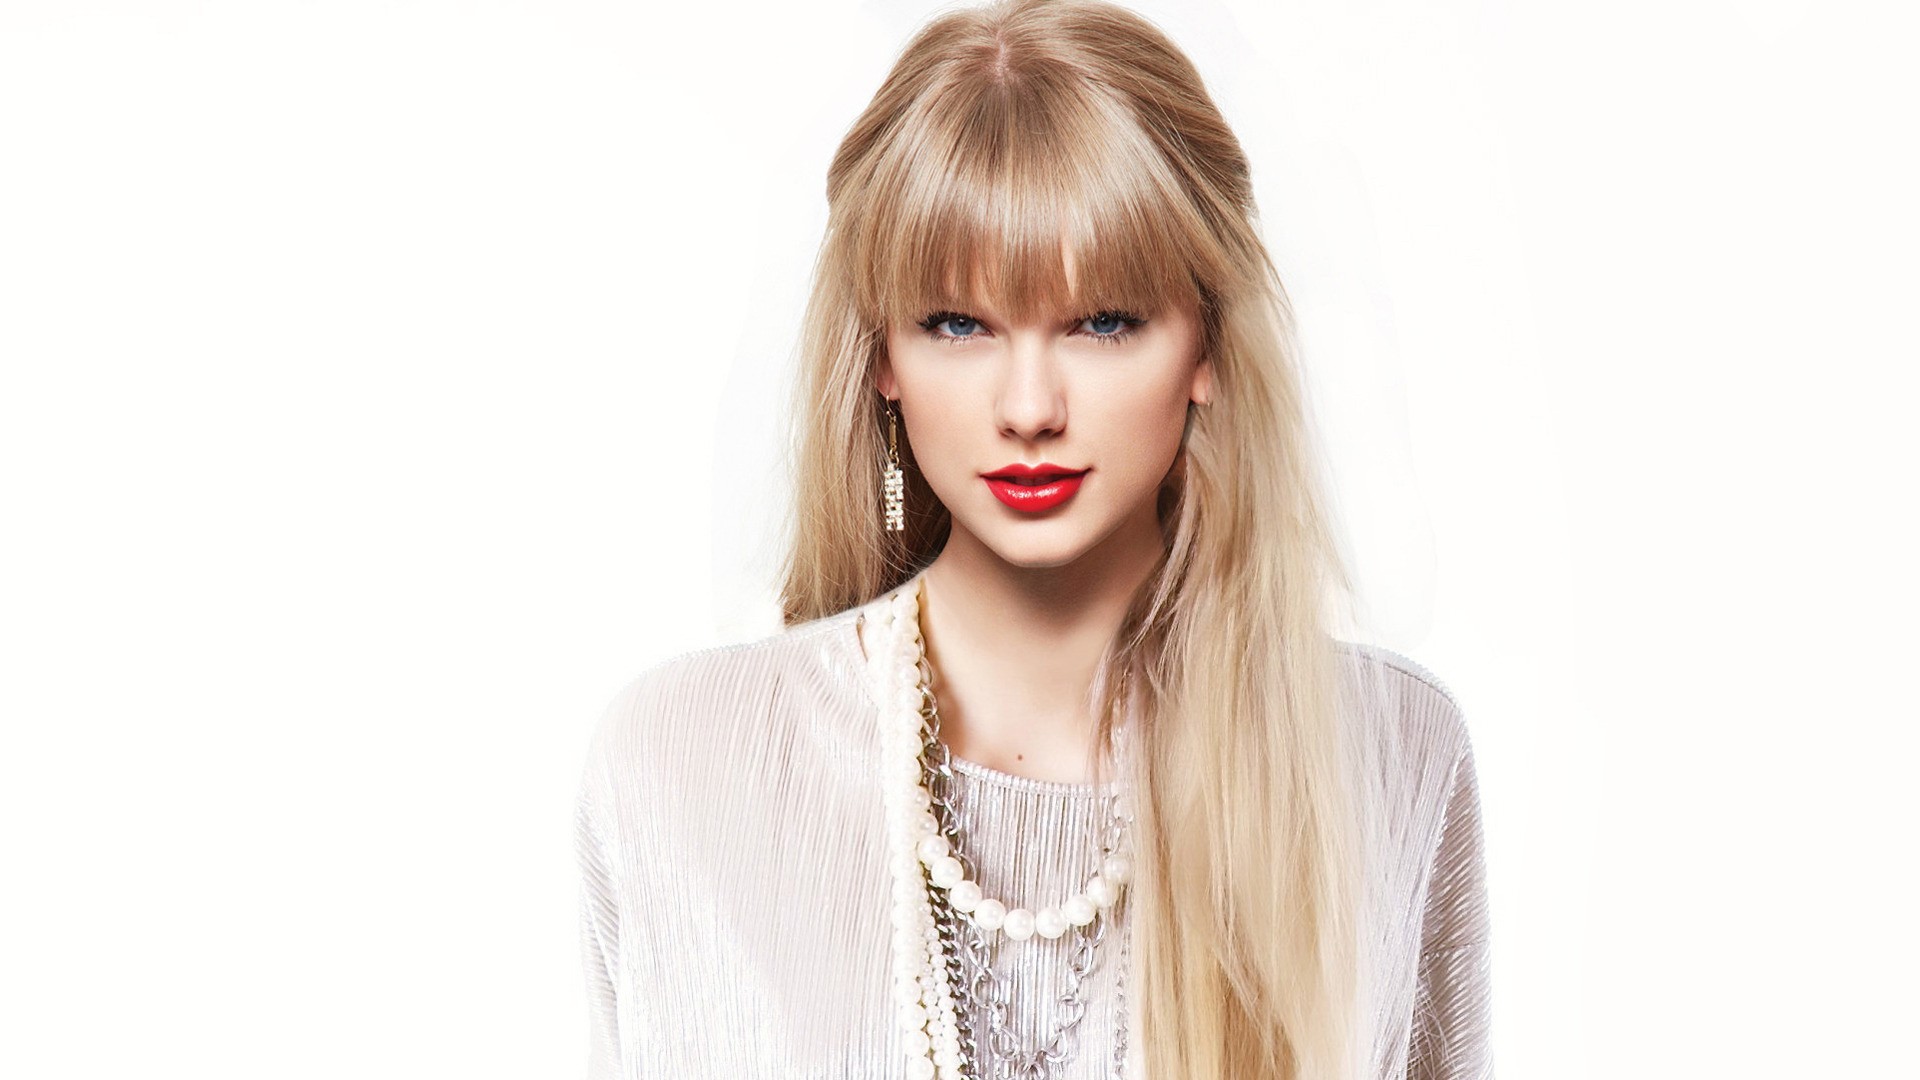 Taylor Swift Wallpaper For Computer